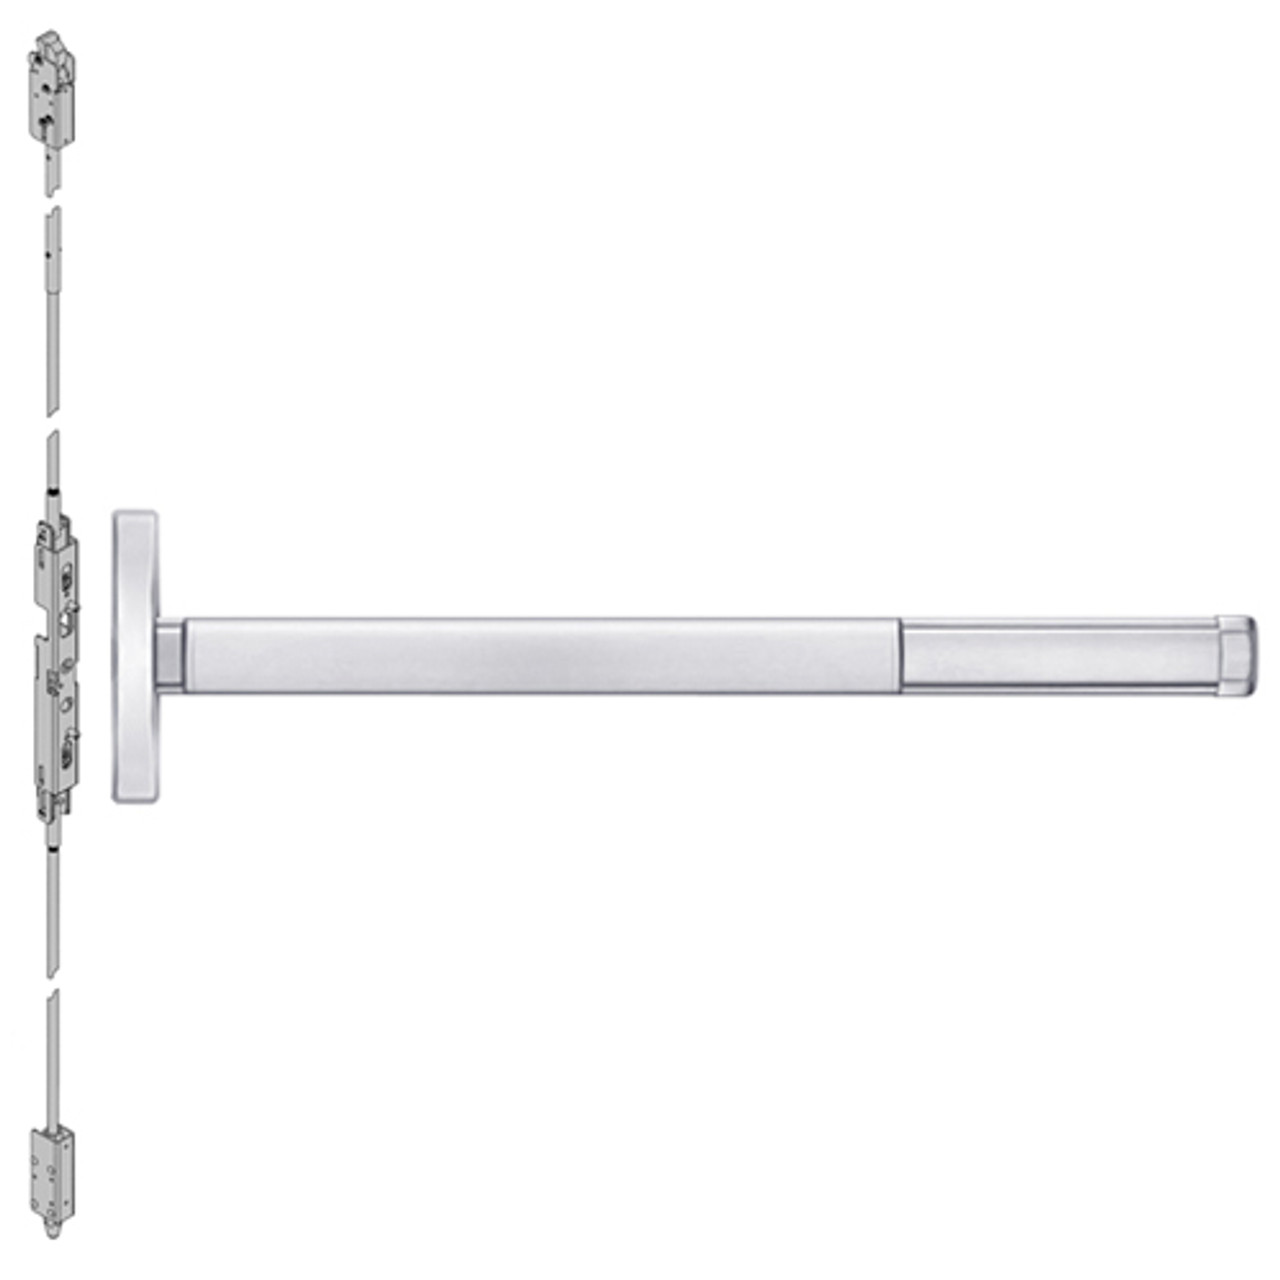 2614CD-625-48 PHI 2600 Series Non Fire Rated Concealed Vertical Rod Exit Device Prepped for Lever Always Active with Cylinder Dogging in Bright Chrome Finish